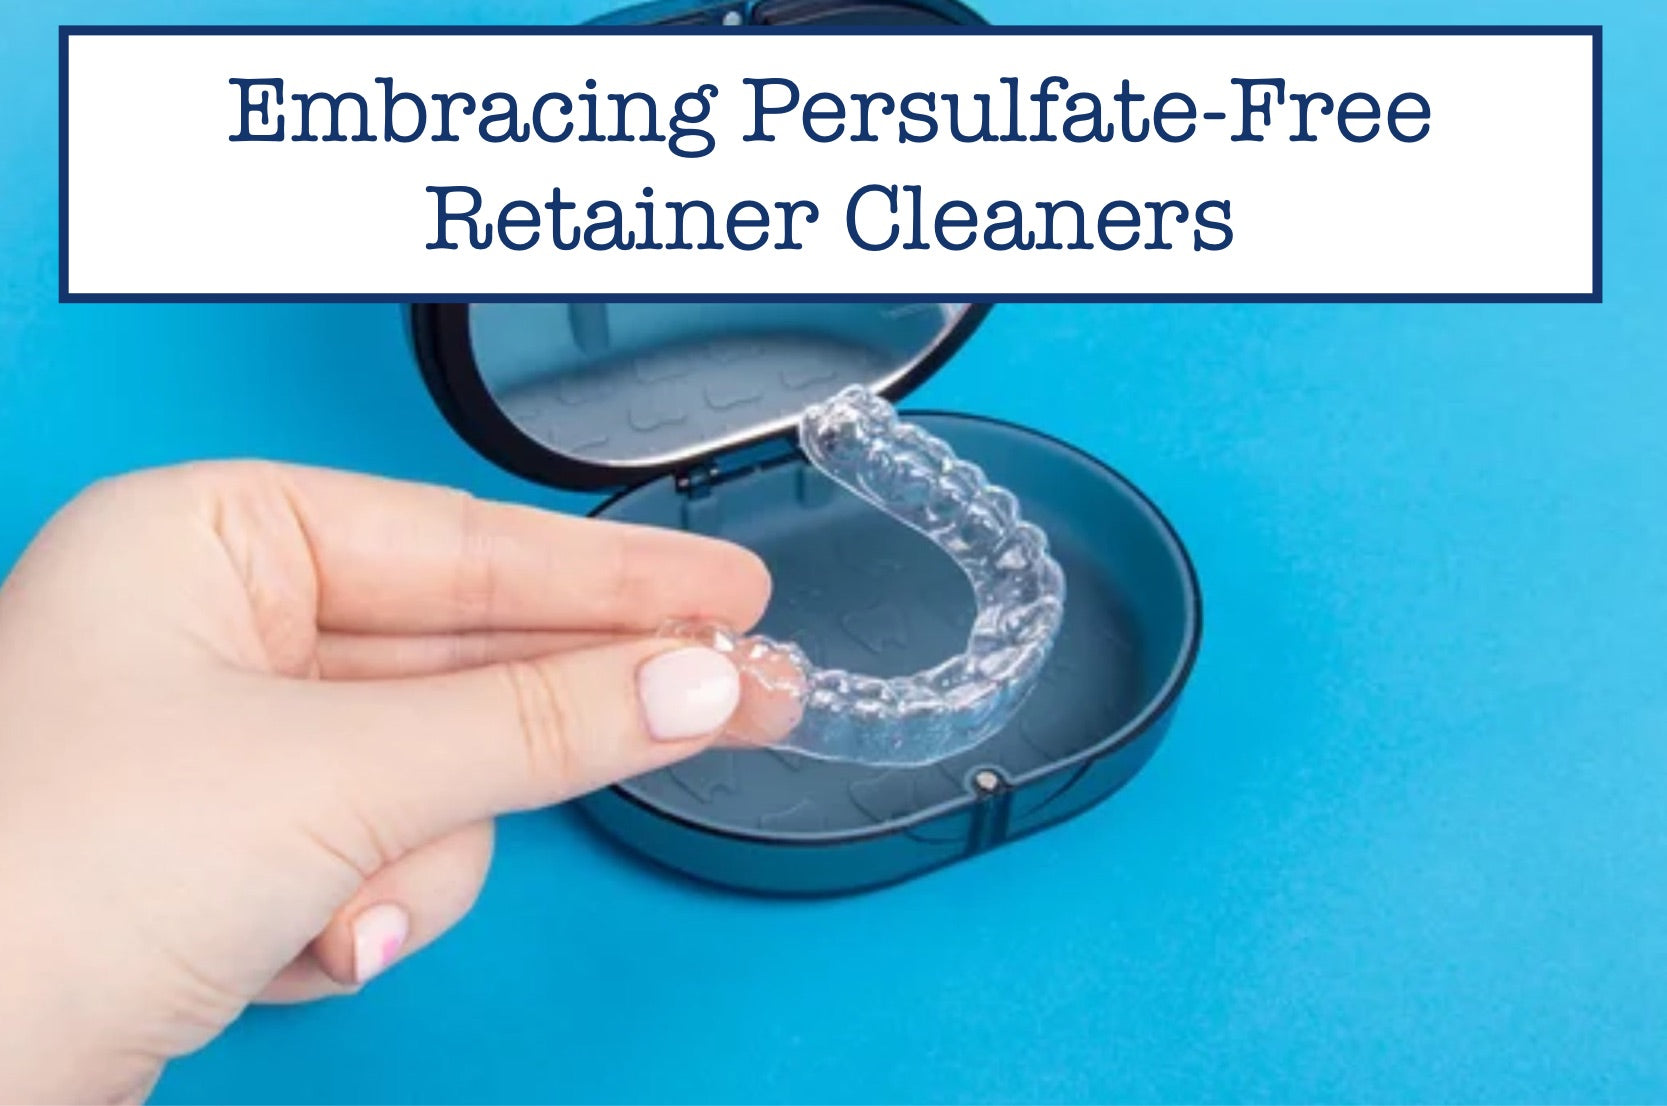 Embracing Persulfate-Free Retainer Cleaners